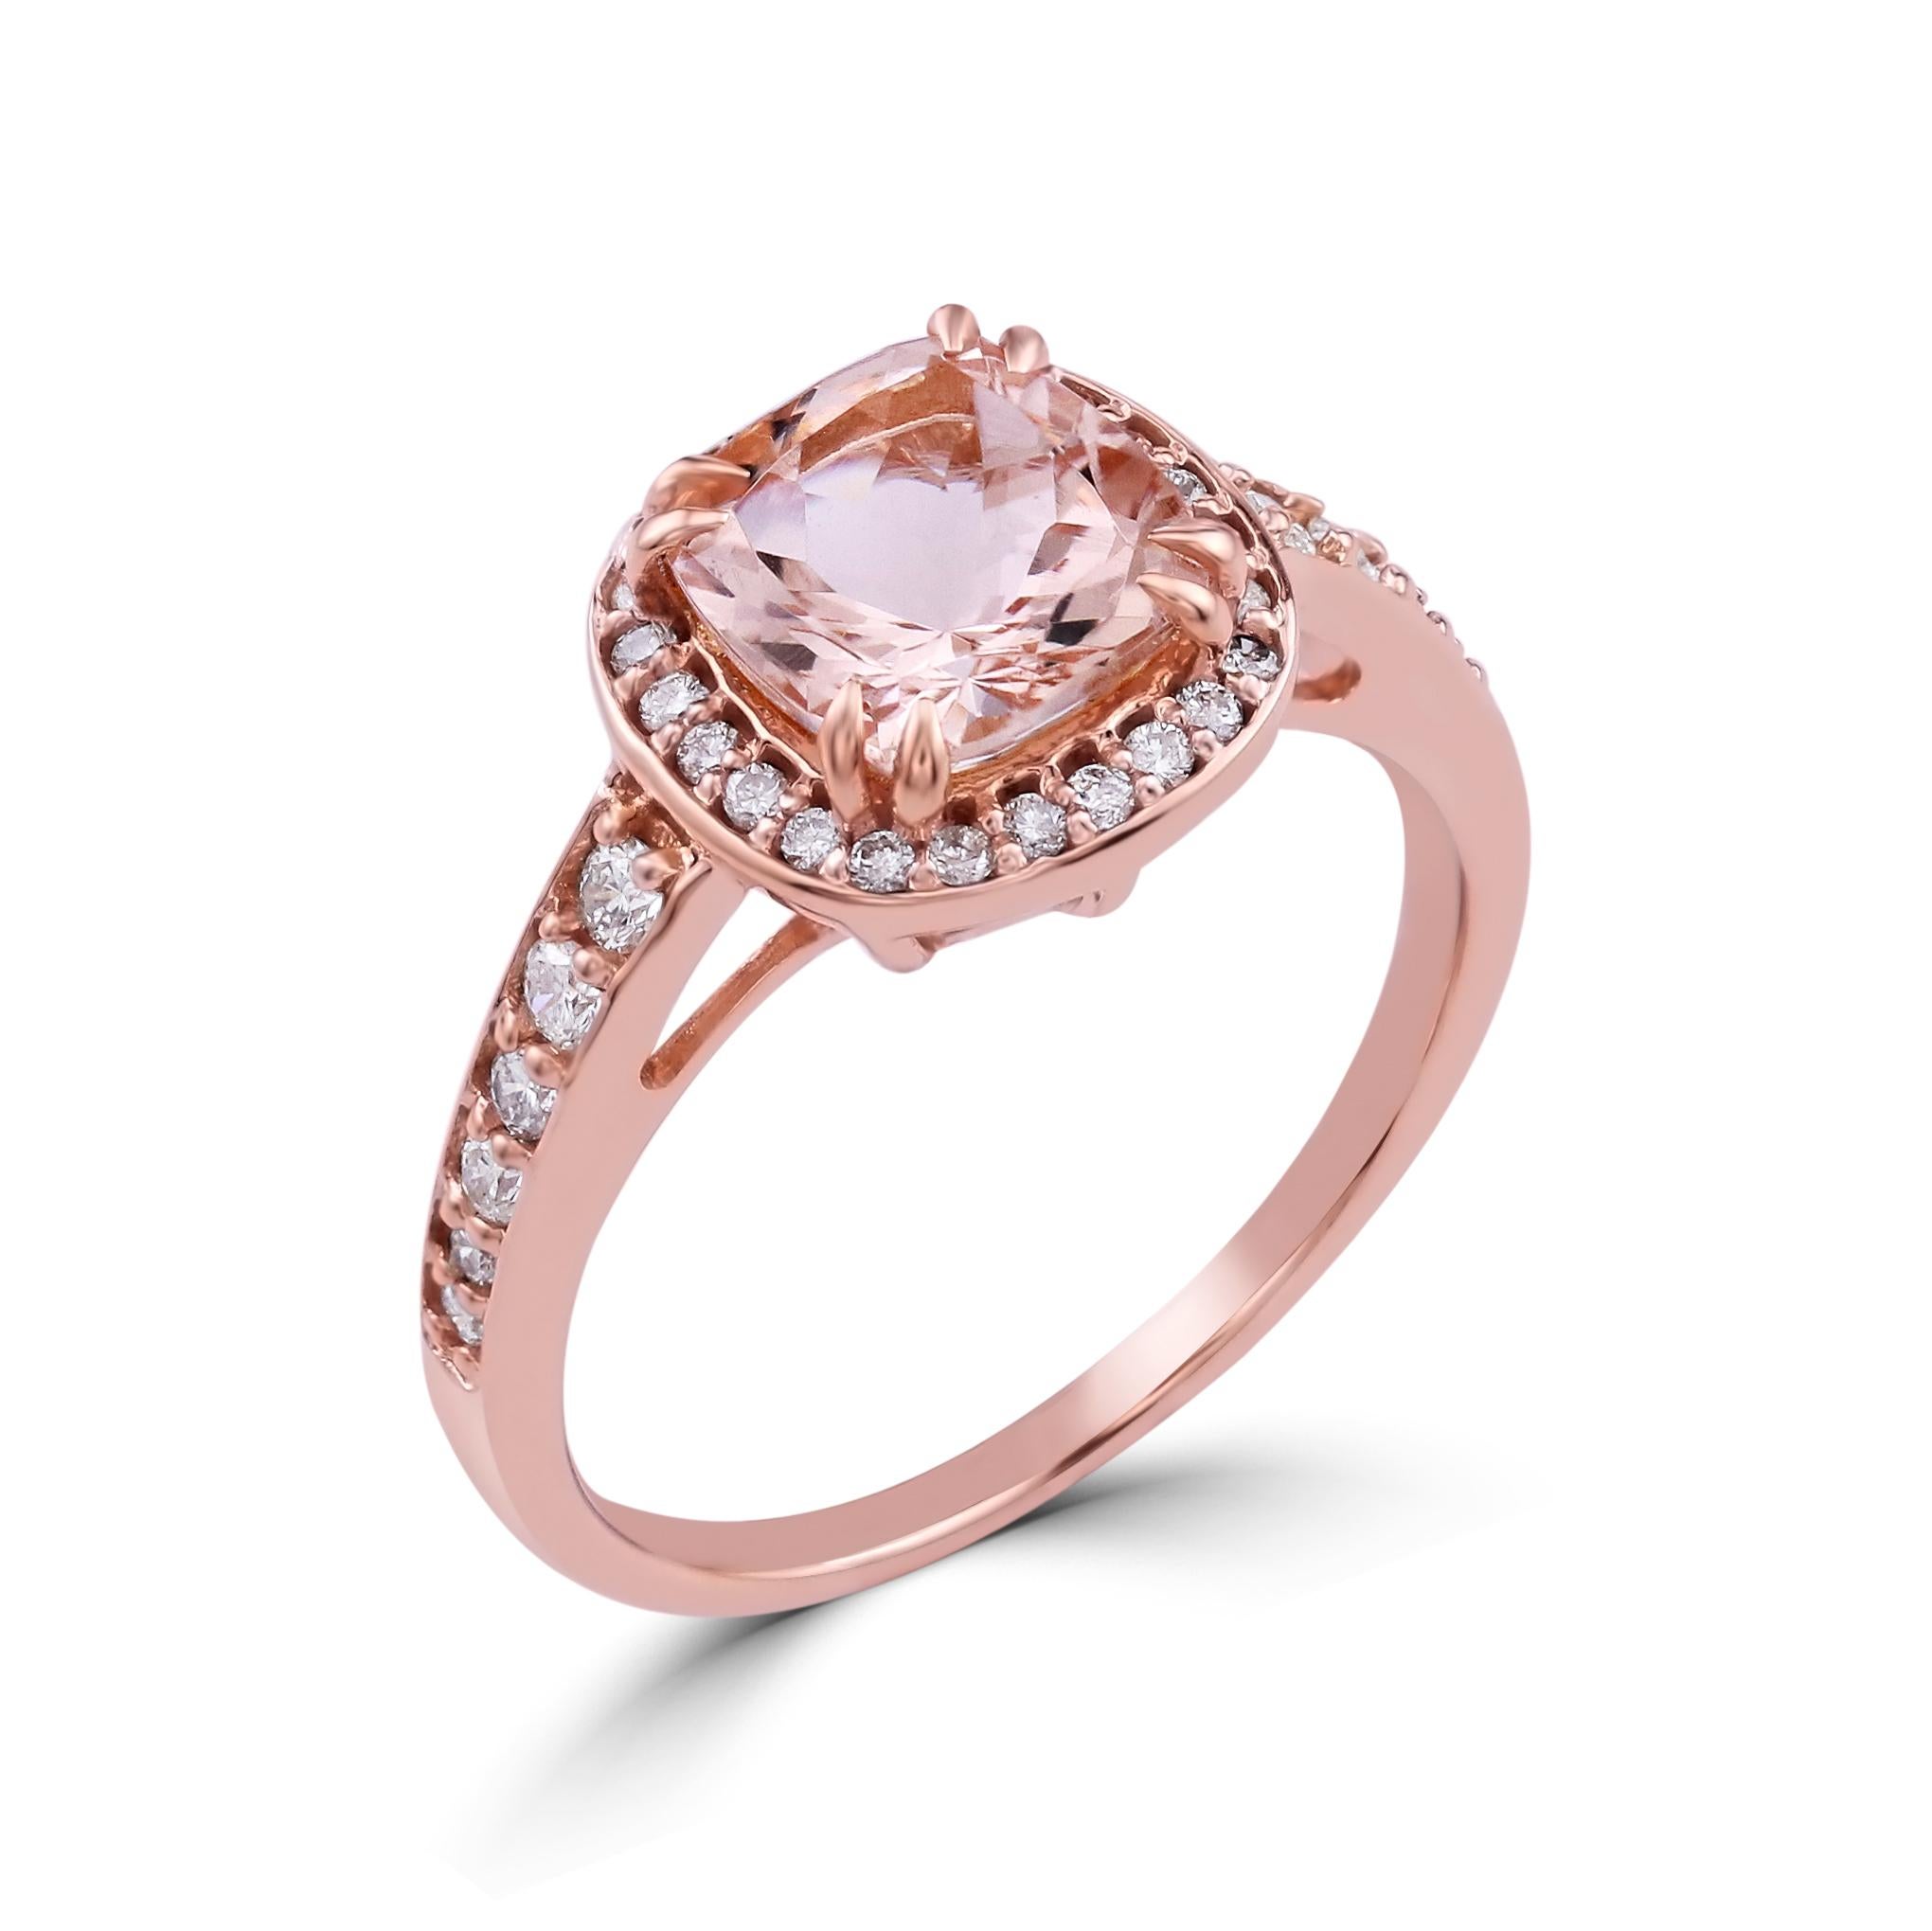 Set your sights on these Gemistry pretty pink gemstone solitaire ring ! This center design features a sparkling halo of round brilliant cut diamonds around the 1.4 carat cushion cut morganite, double prong set on a band of 14k rose gold. Round